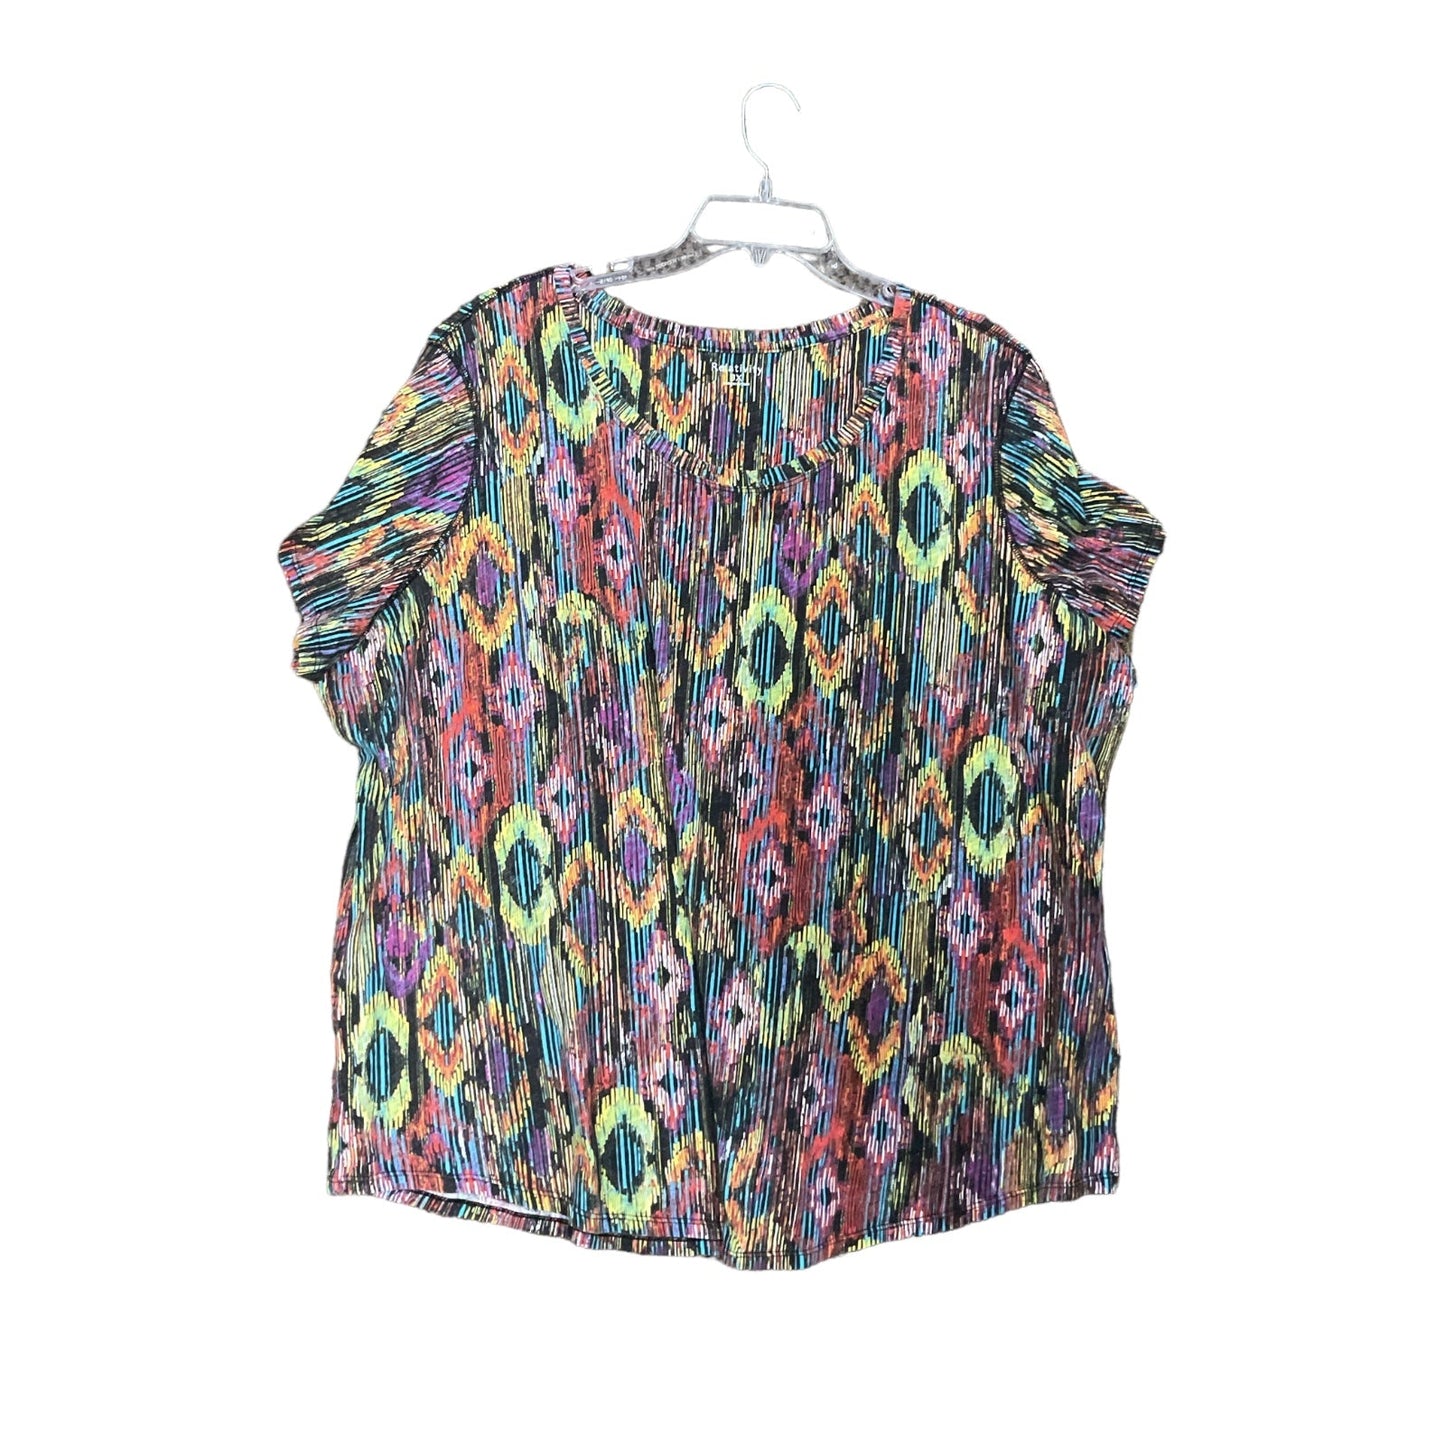 Multi-colored Top Short Sleeve Relativity, Size 3x